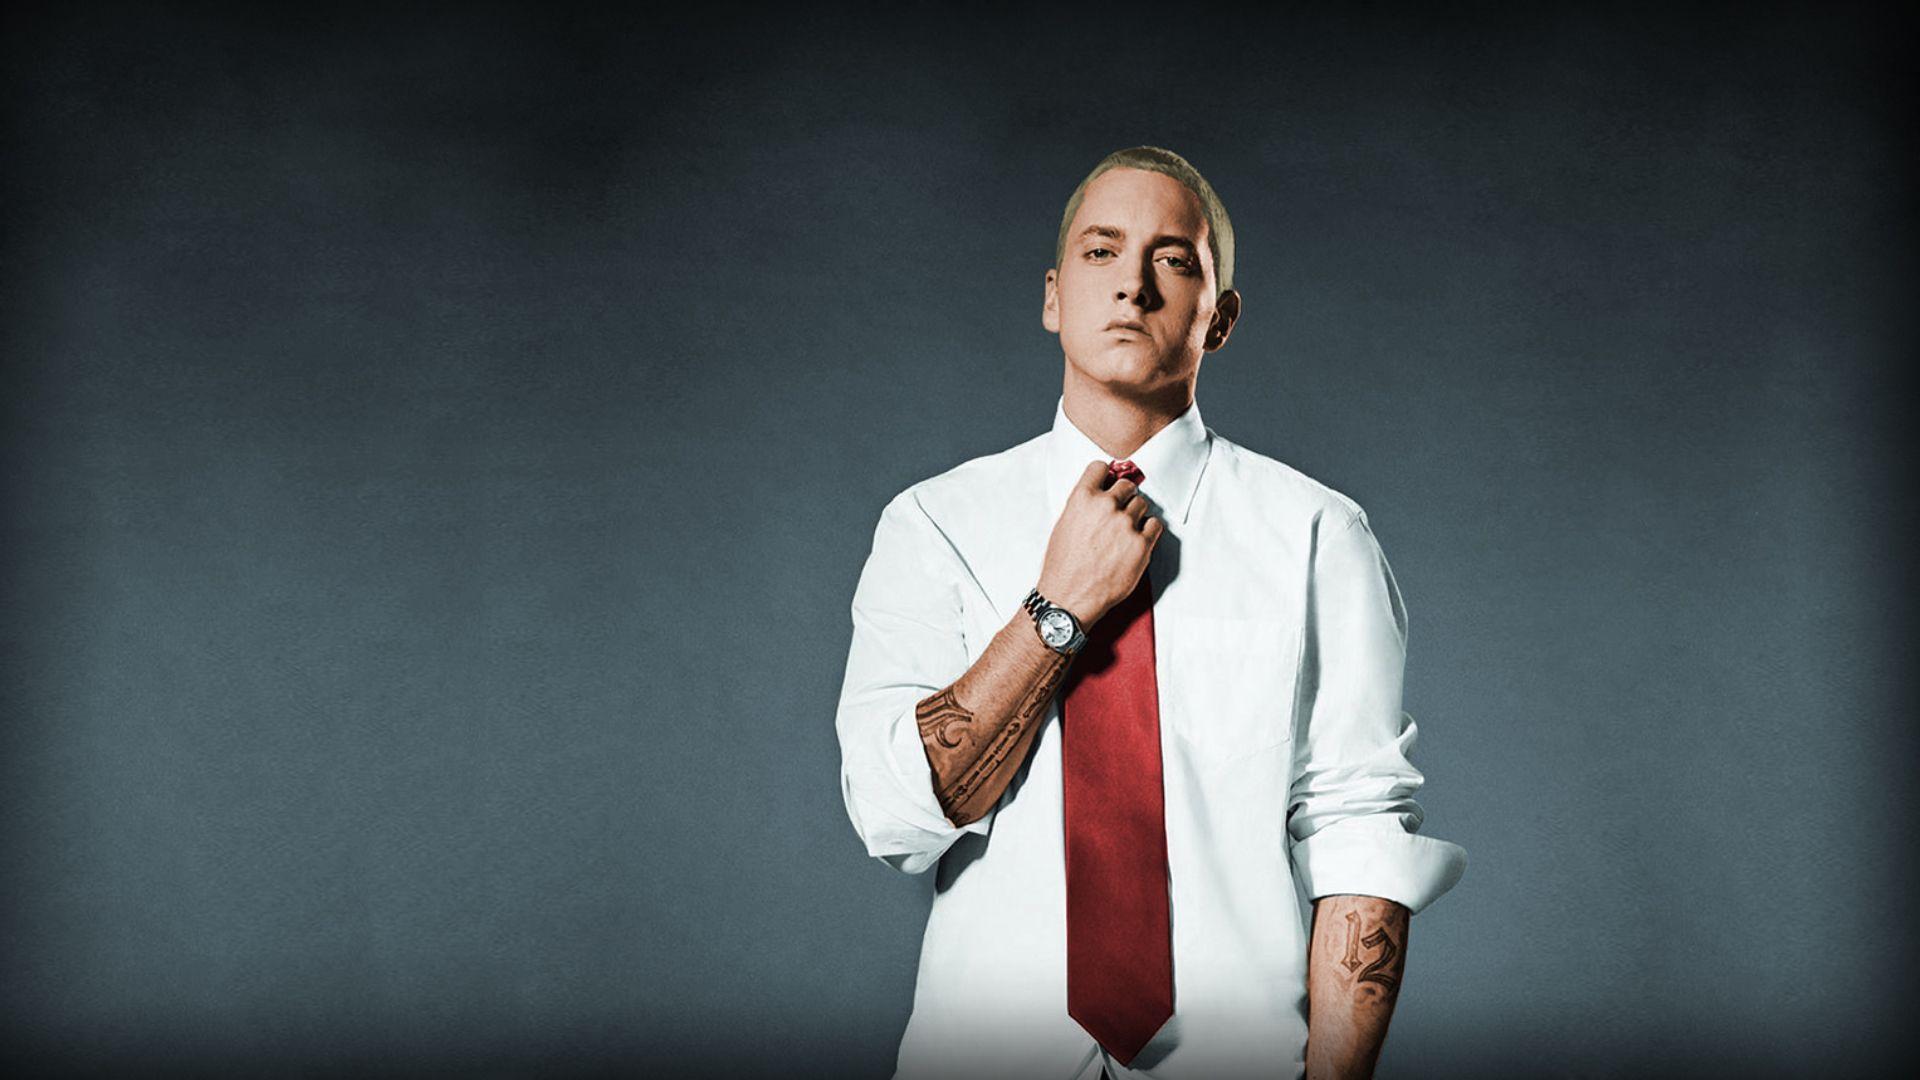 Eminem Wallpaper High Resolution and Quality Download. HD